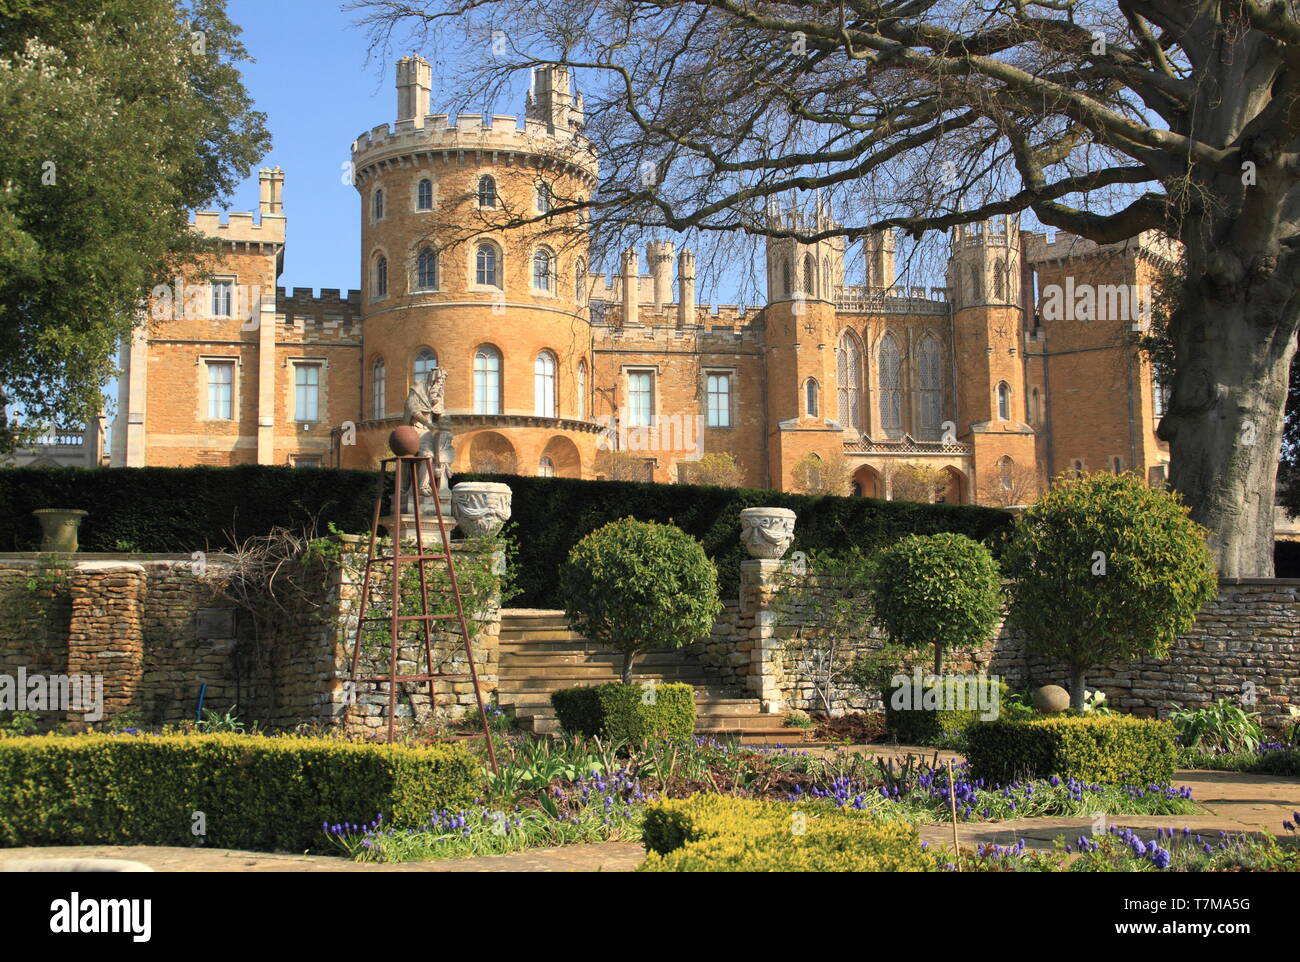 Belvoir Castle, an English stately home, seen from the formal rose garden in spring, Leicestershire, East Midlands, UK Stock Photo